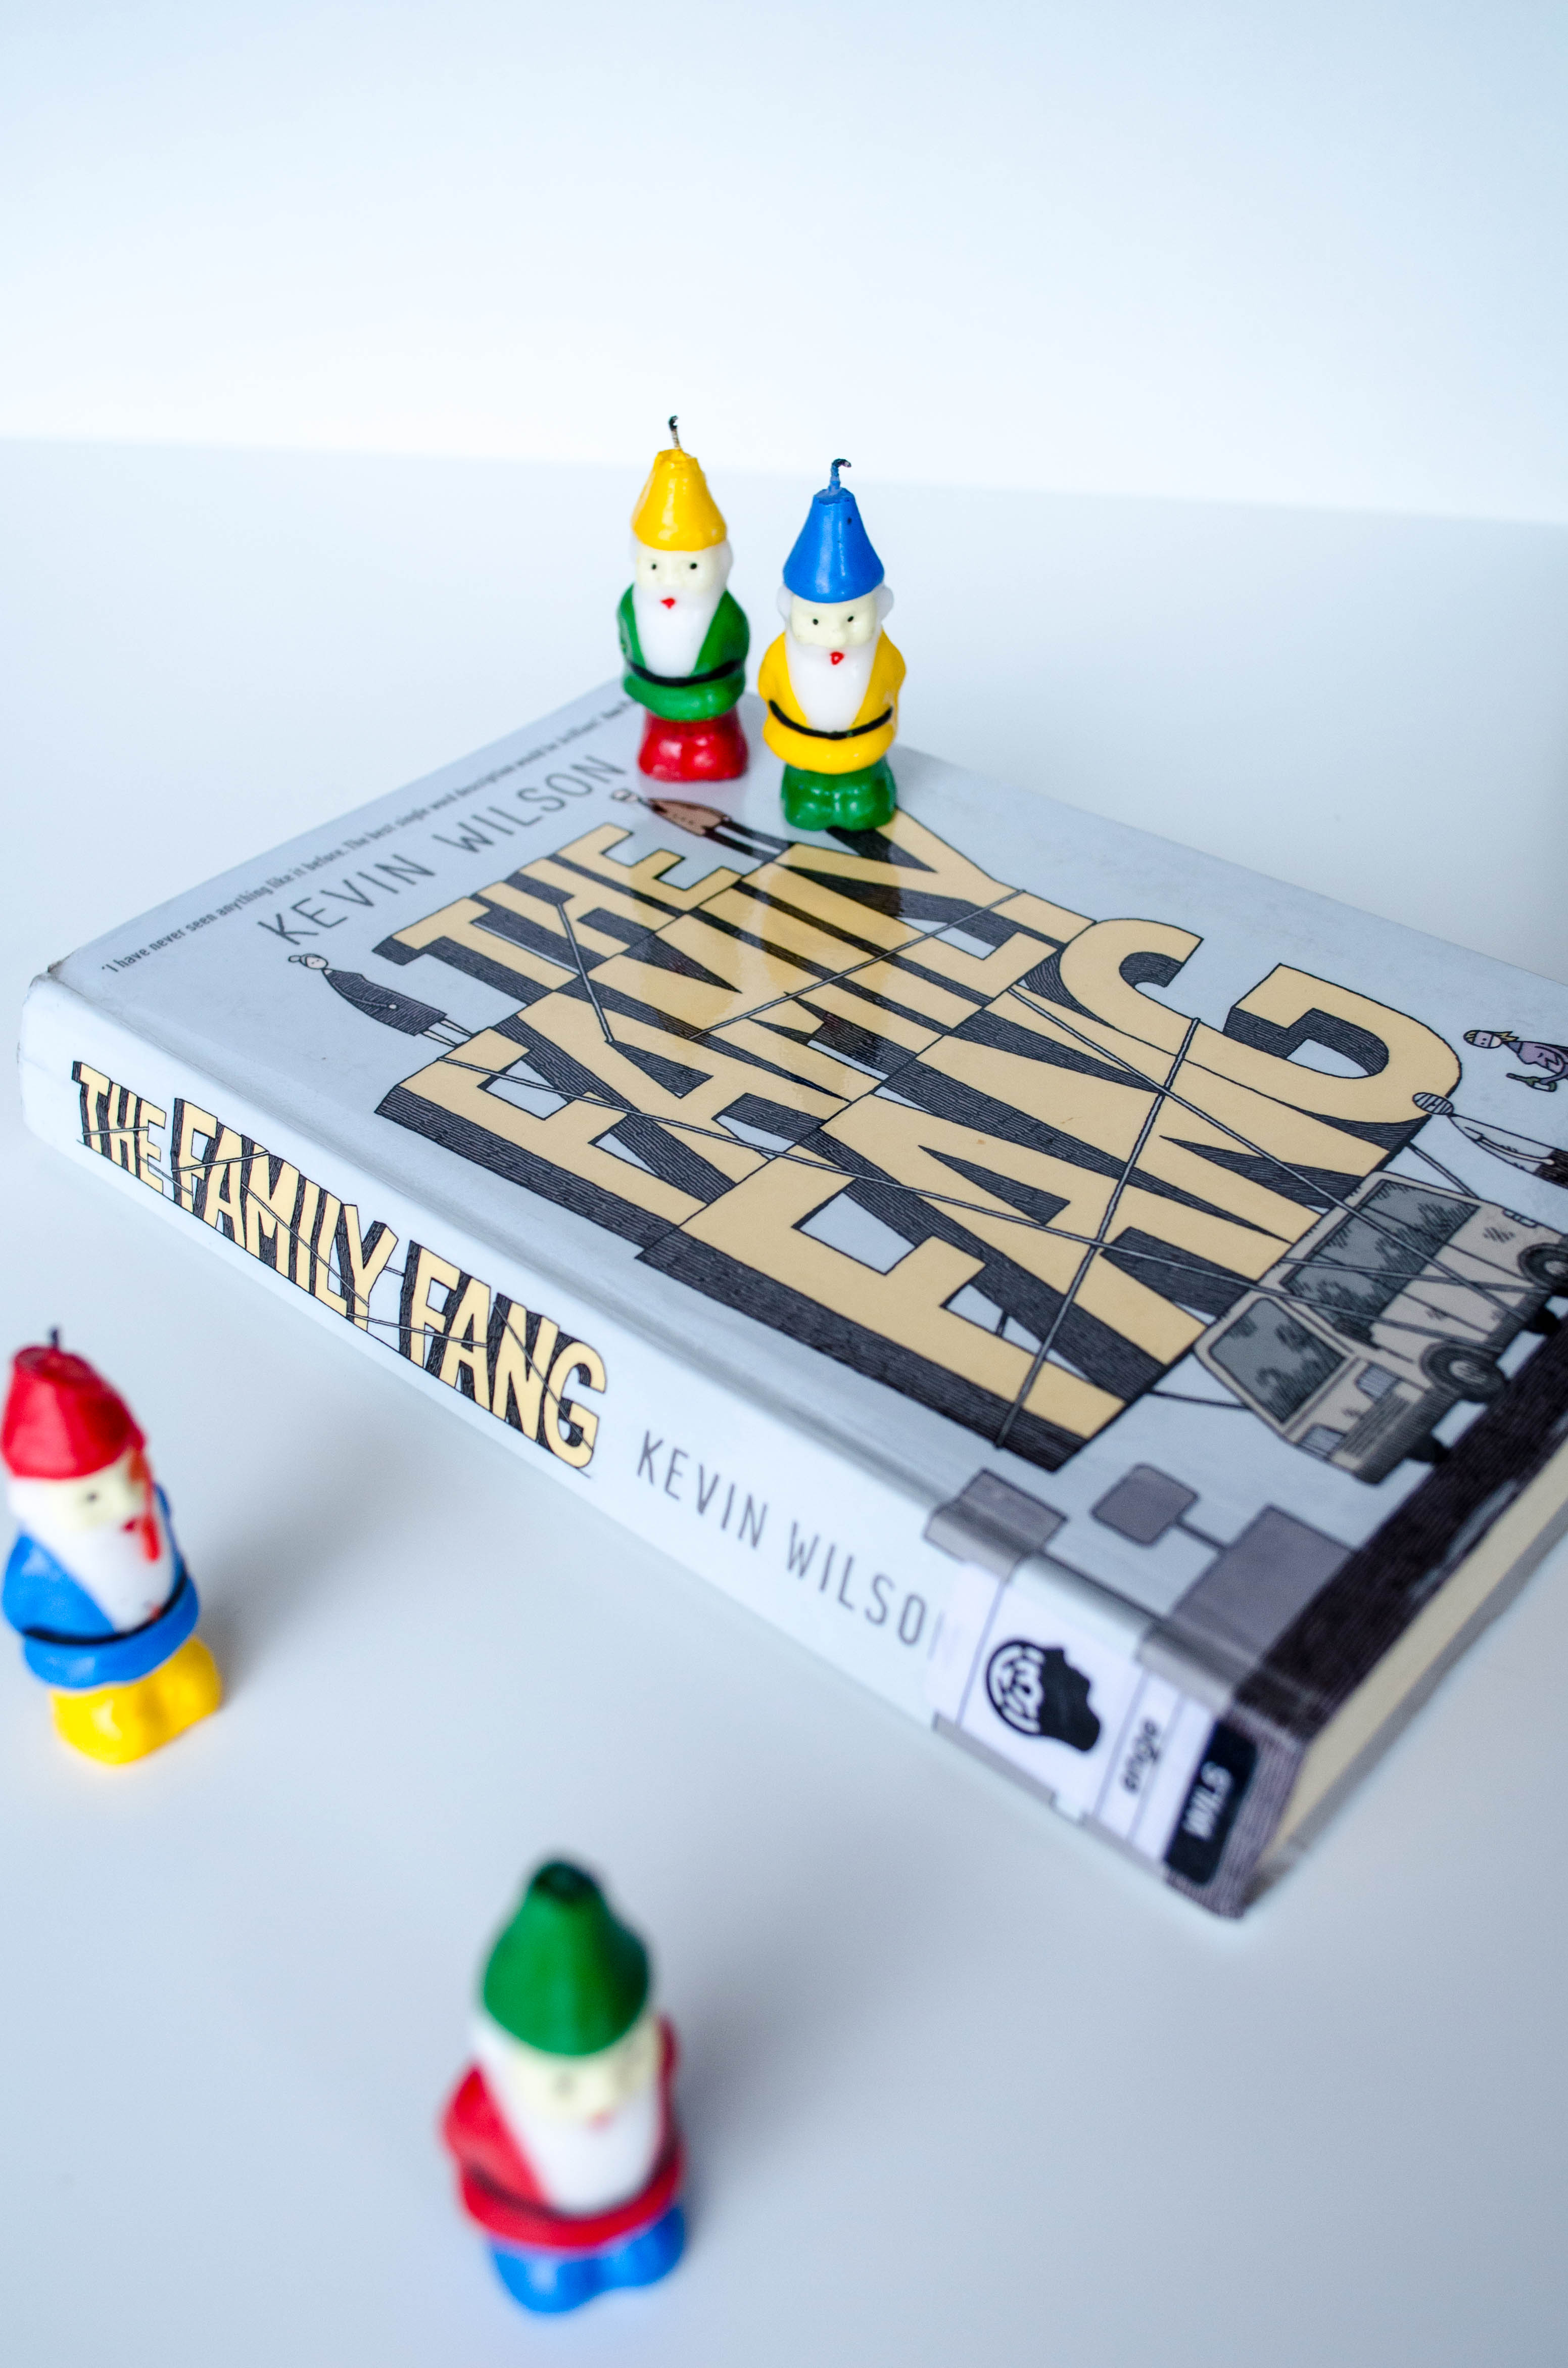 The Family Fang by Kevin Wilson tells the story of the Fangs, and the unpredictable and sometimes traumatic art they create together